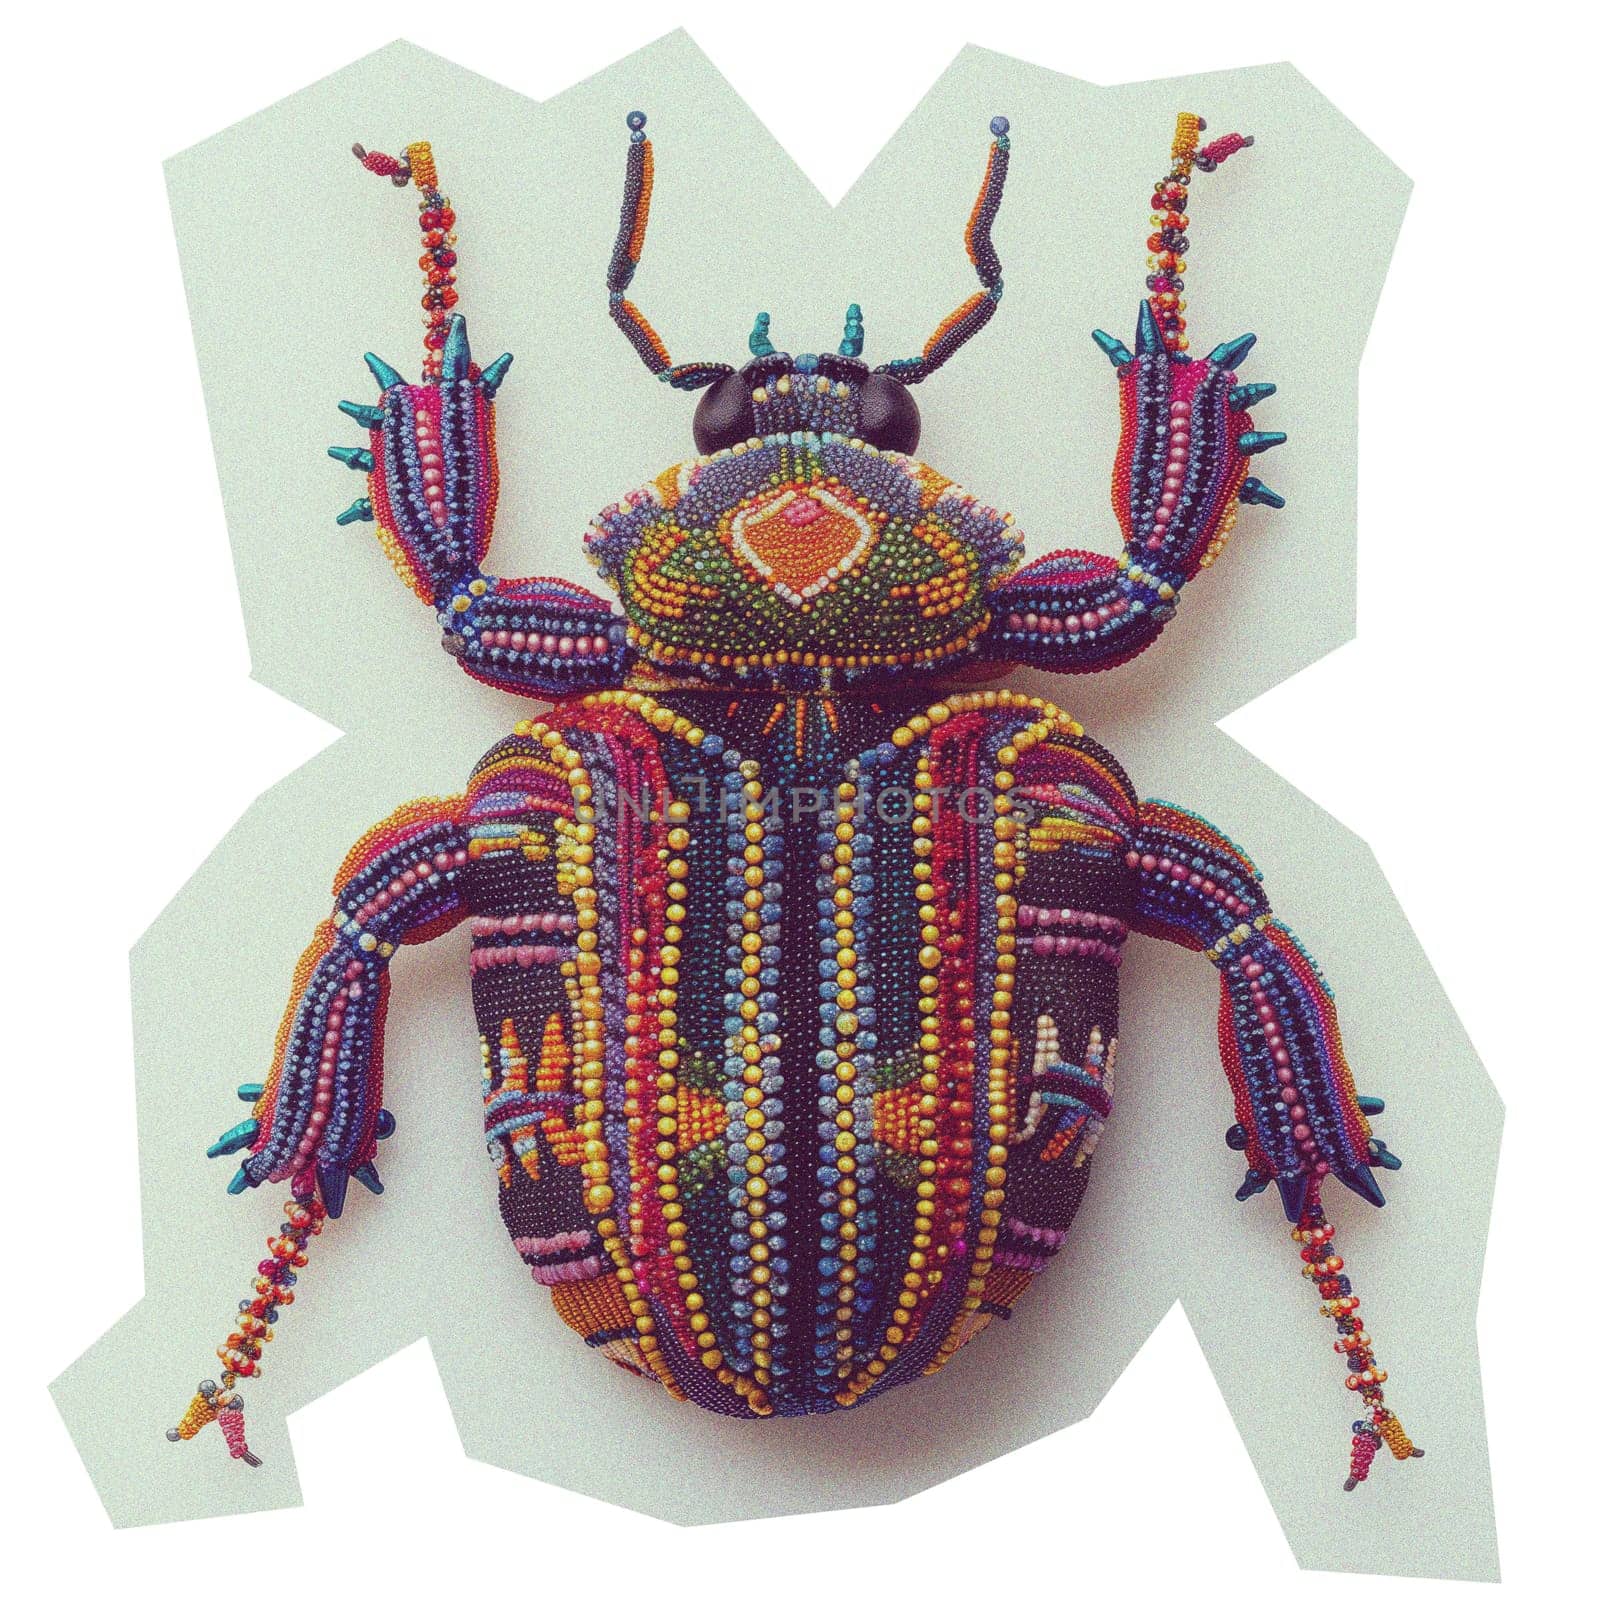 Decorative beetle with colorful beaded patterns by Dustick